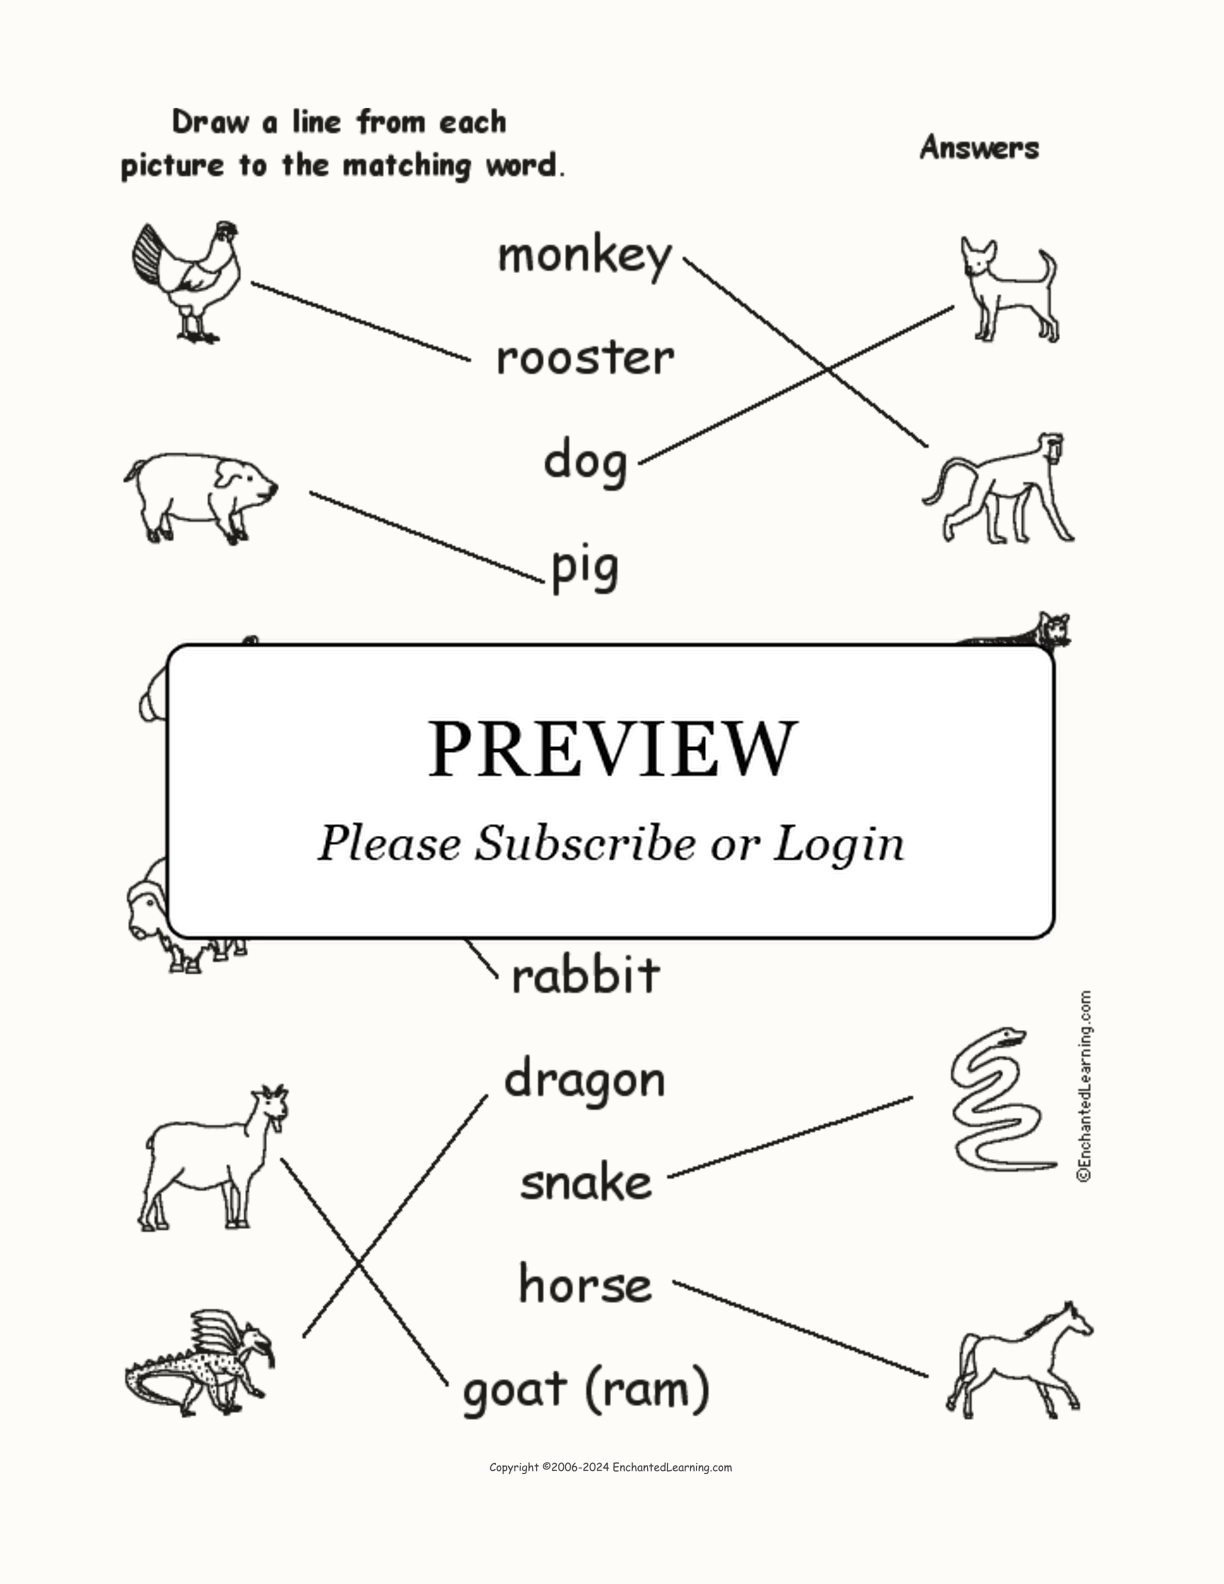 Chinese Zodiac - Match the Words to the Pictures interactive worksheet page 2